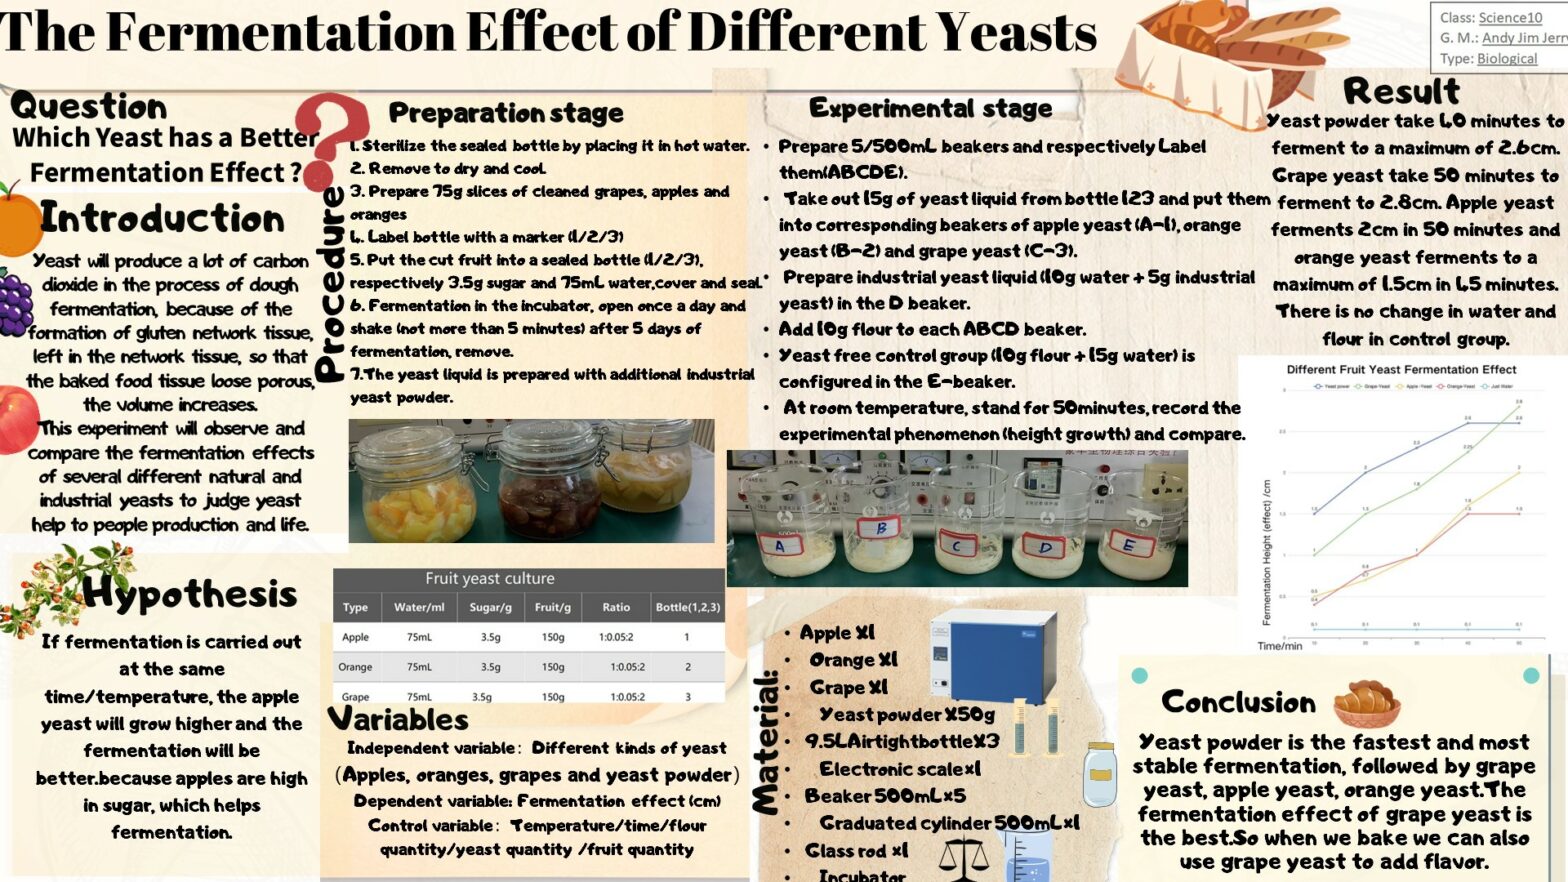 The Fermentation Effect of Different Yeasts